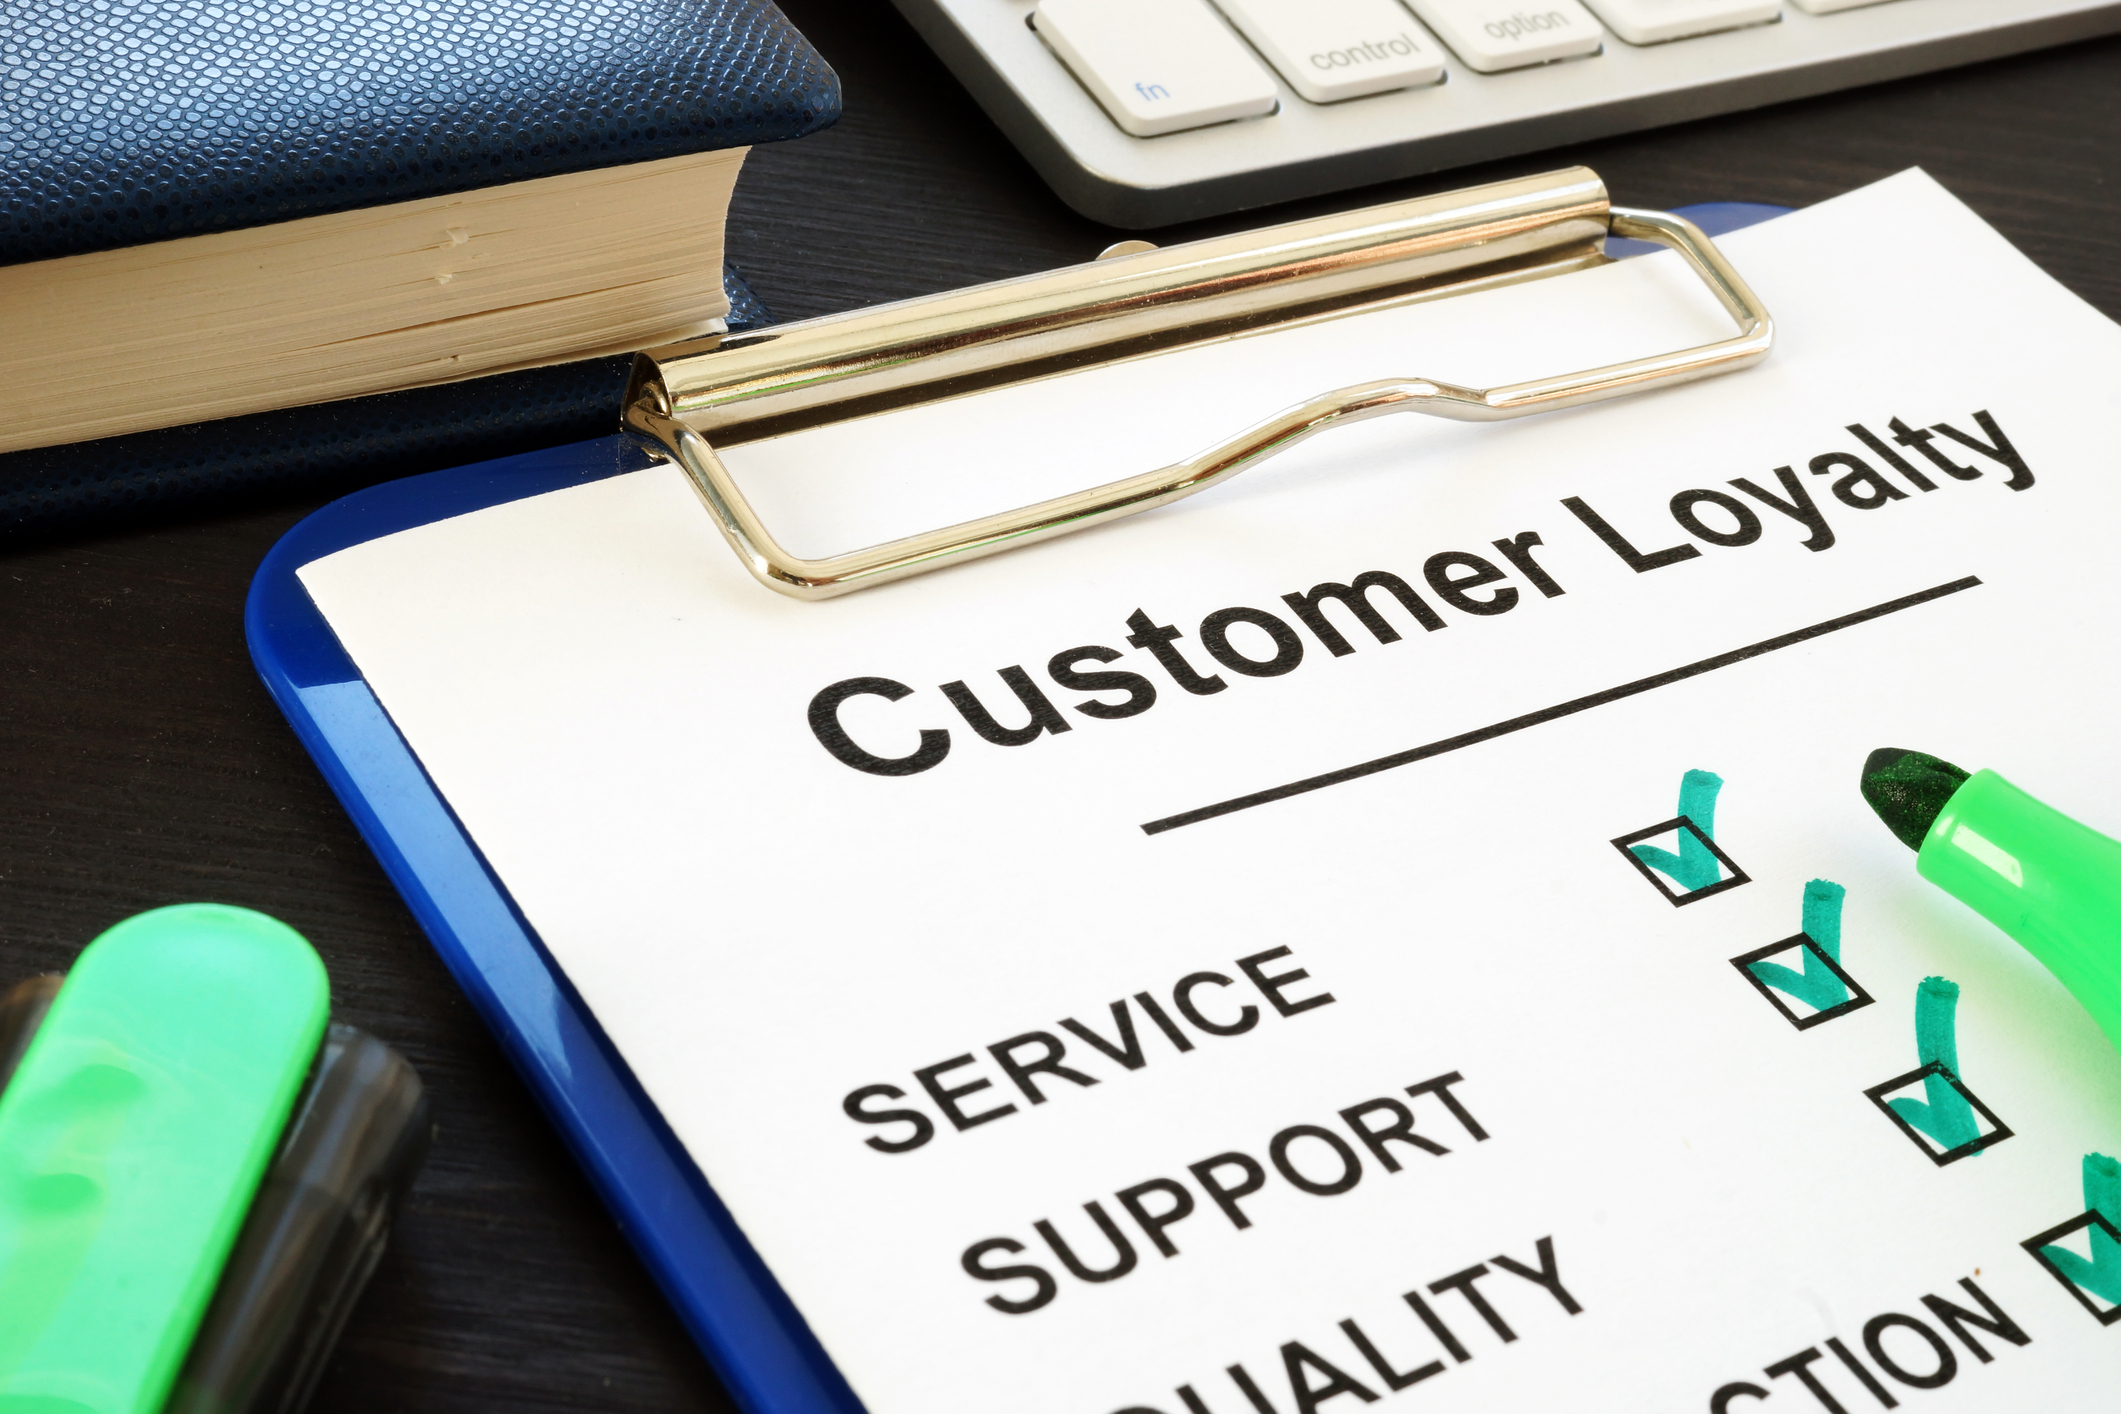 How Car Salesperson Can Build Customer Loyalty at a Dealership